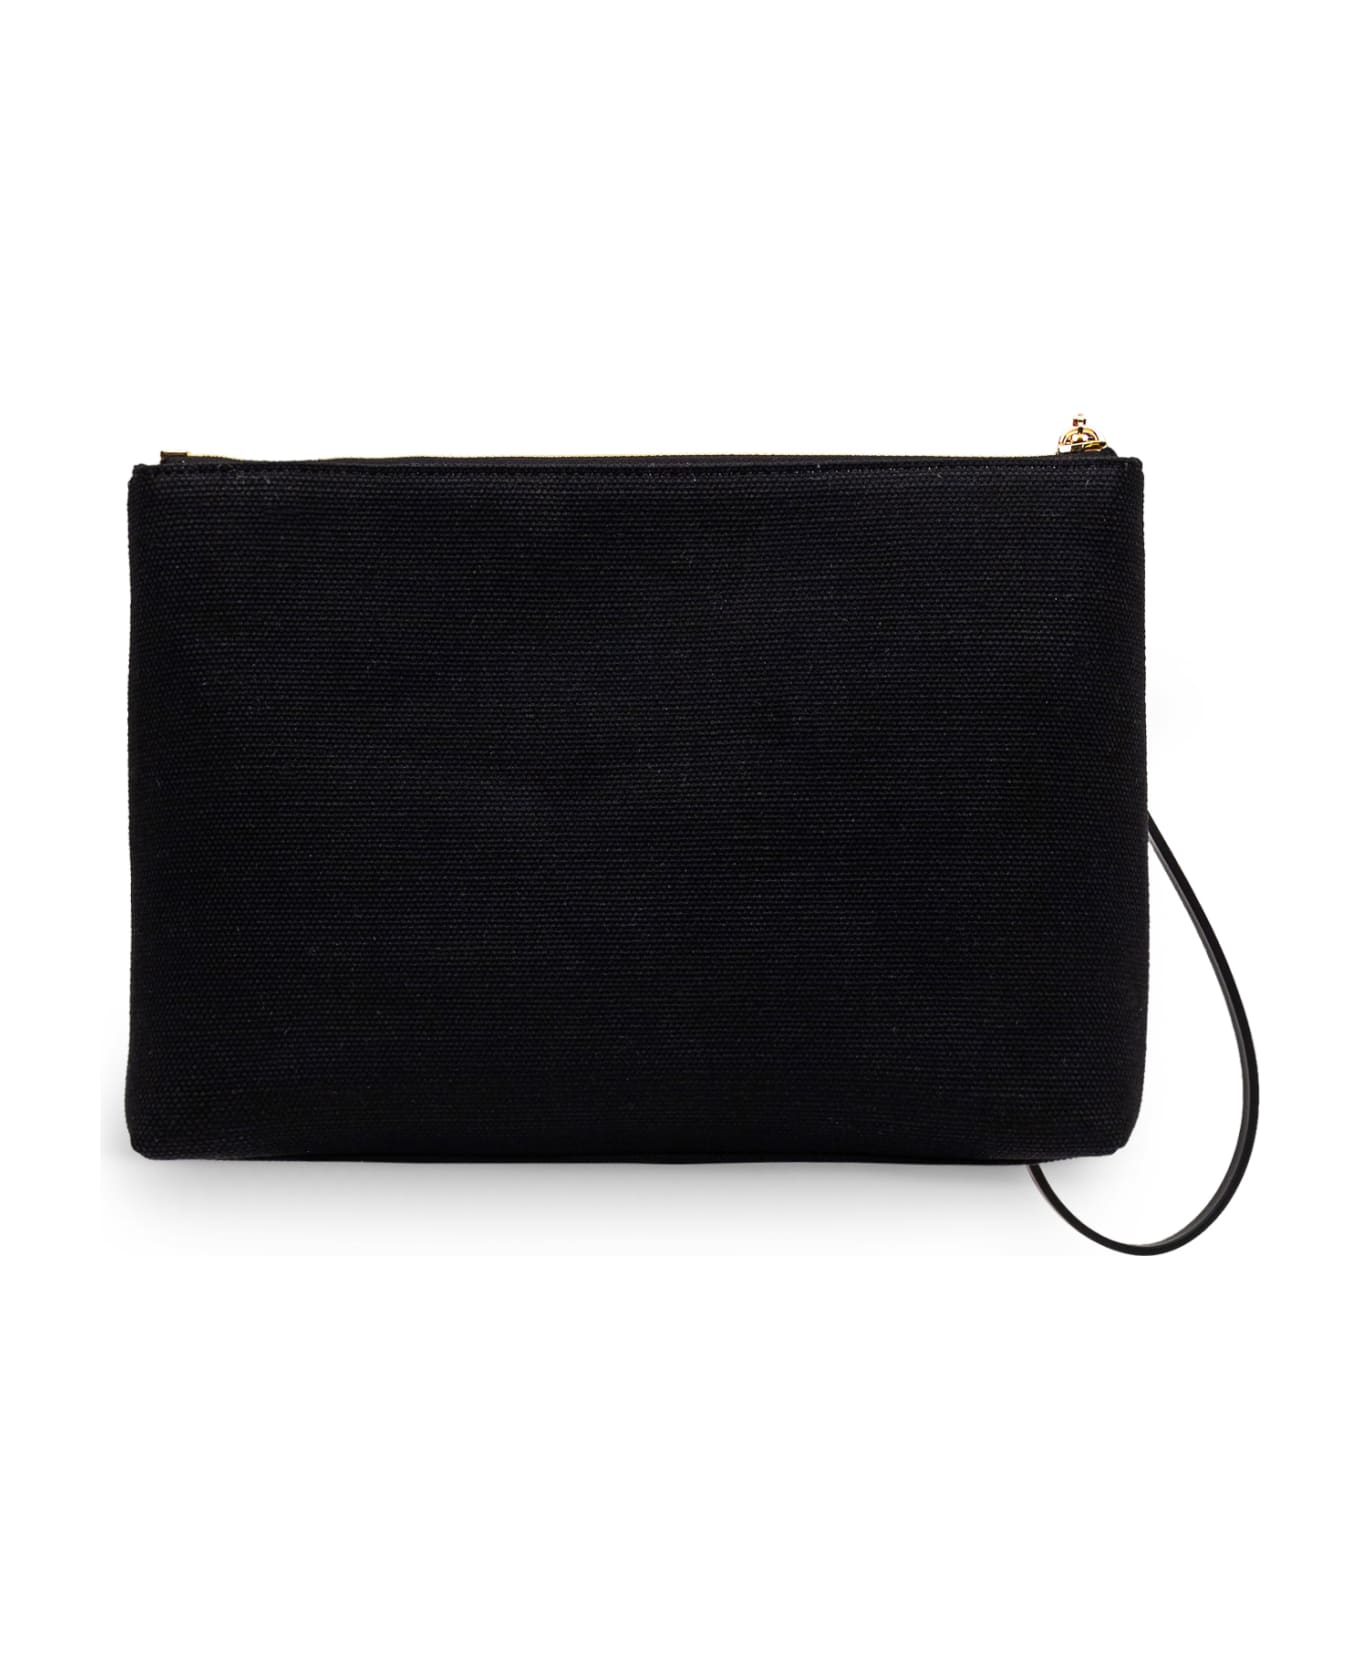 Givenchy Travel Pouch Clutch - Black